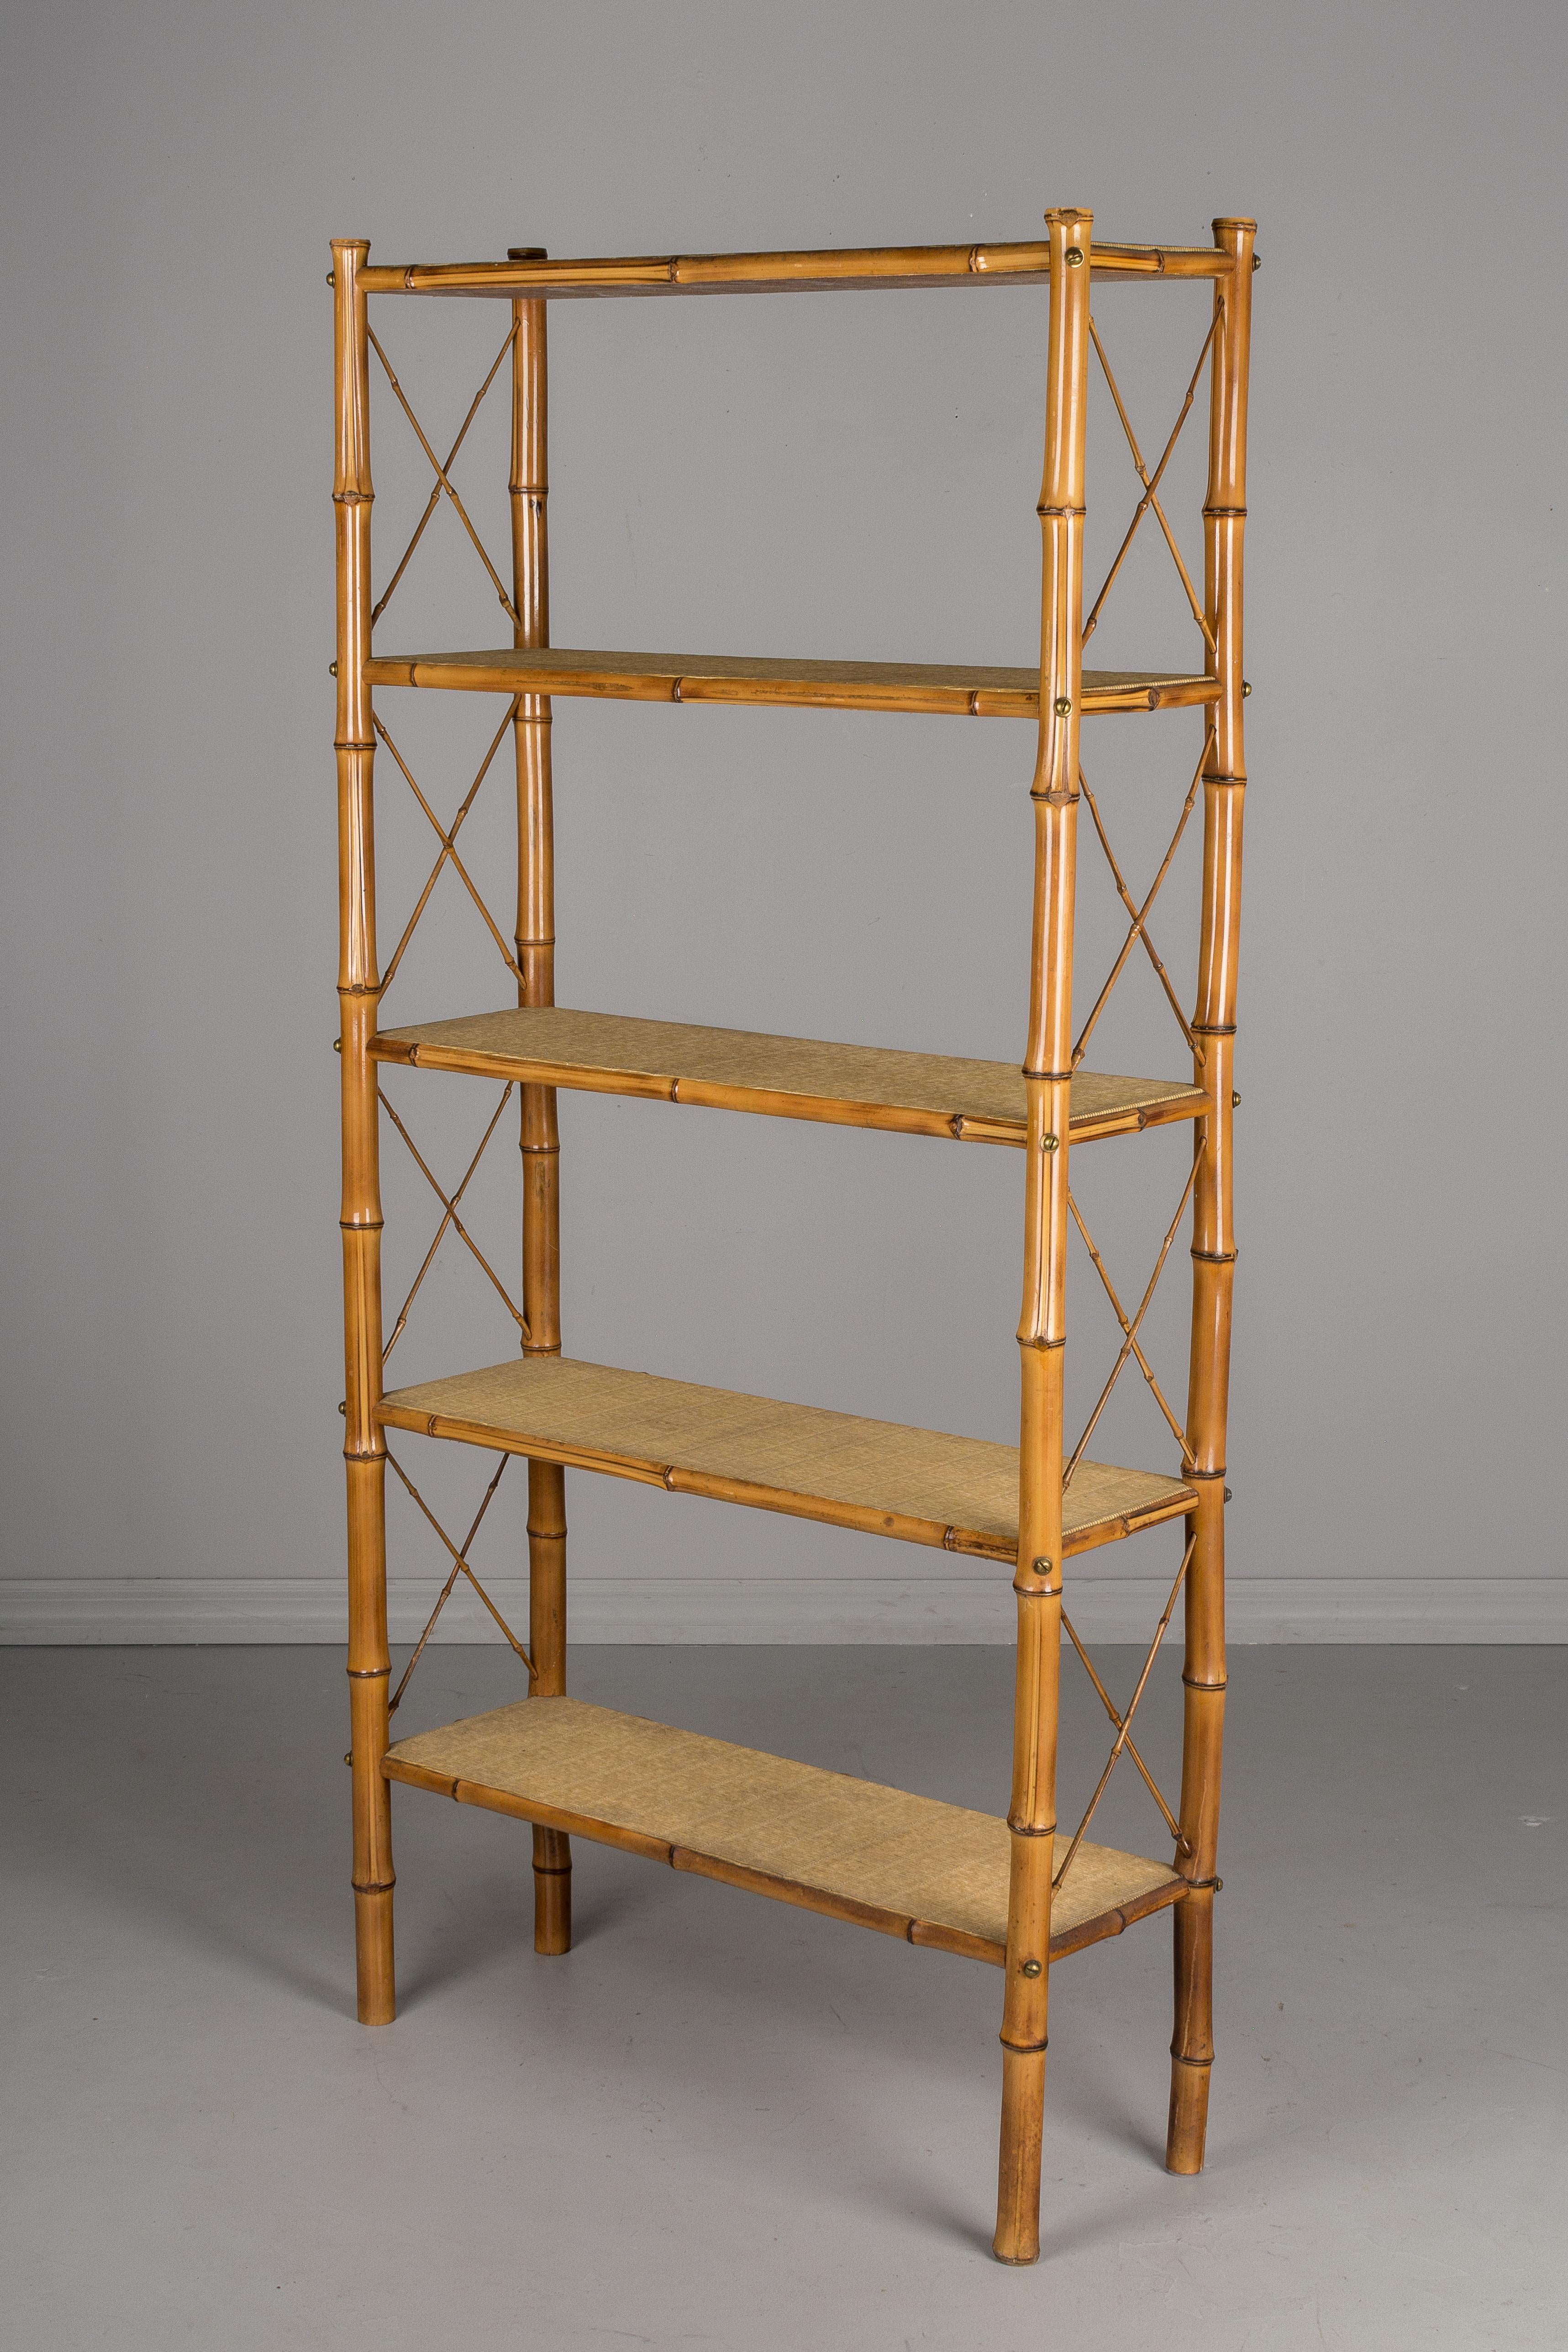 A Mid-Century Modern French étagère, or open bookcase, with a sturdy bamboo frame and tightly woven rattan shelves. Decorative X-supports on the sides. Shelves secured with brass screws. Four shelves are spaced 13